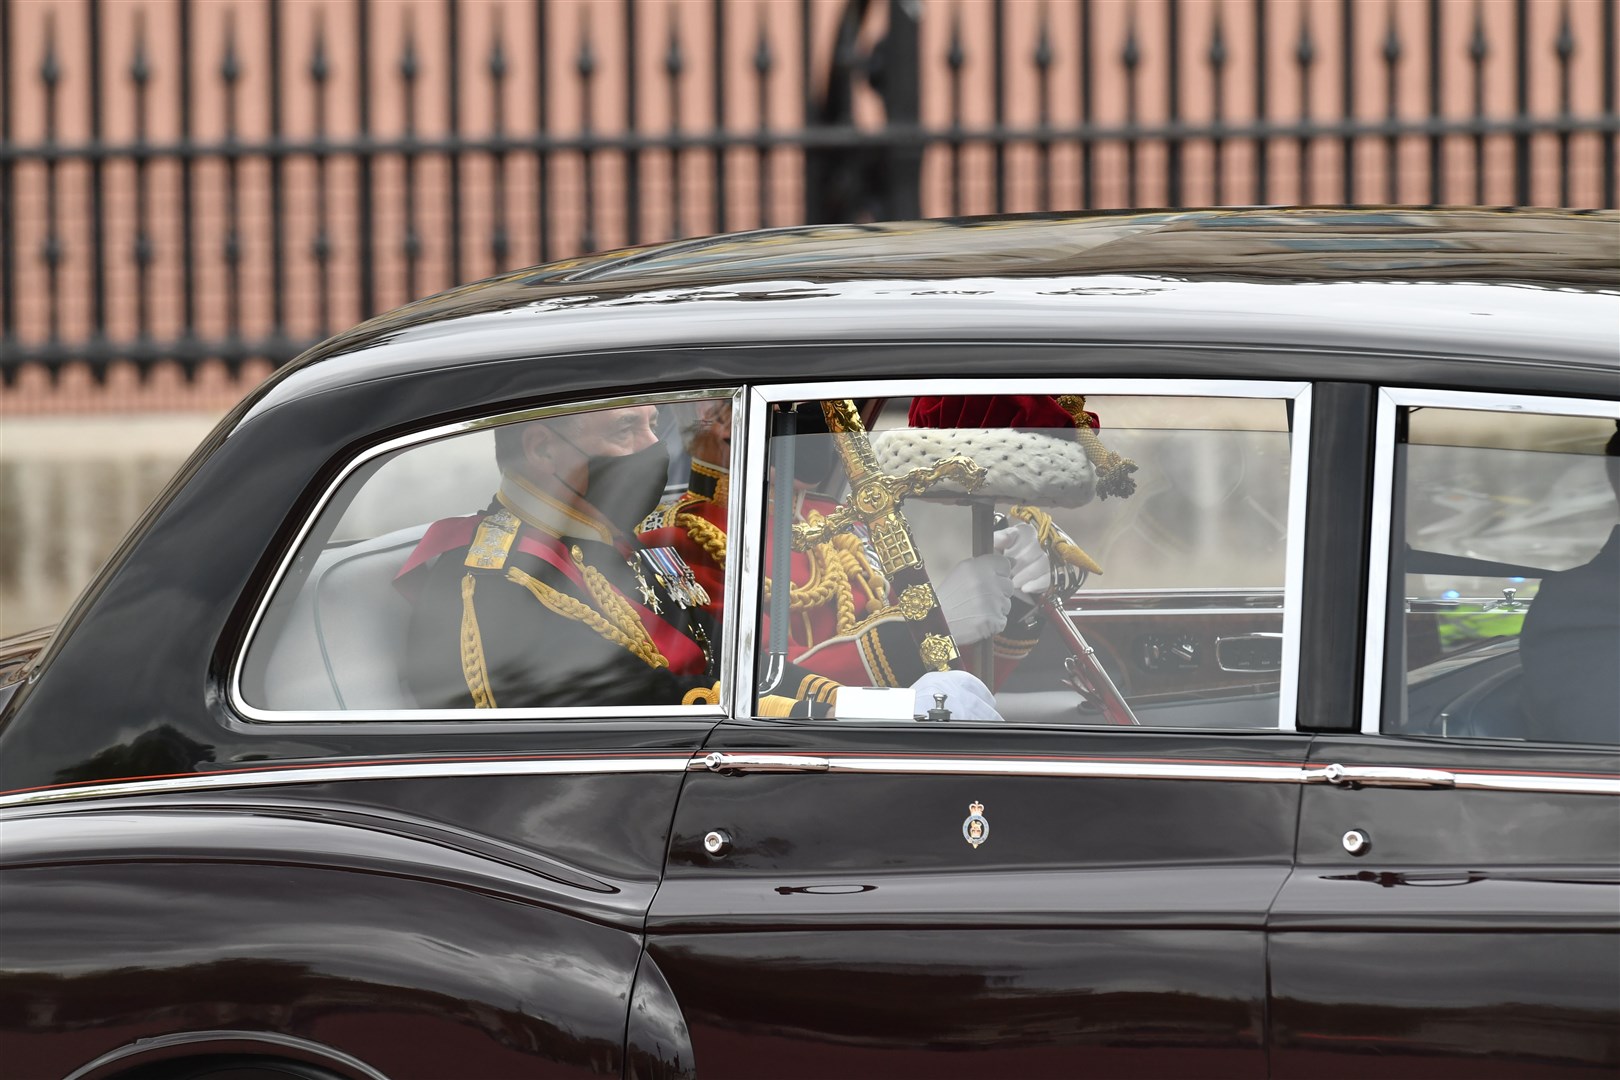 The Sword of State, left, leaves Buckingham Palace for the state opening of Parliament in 2021 (PA)